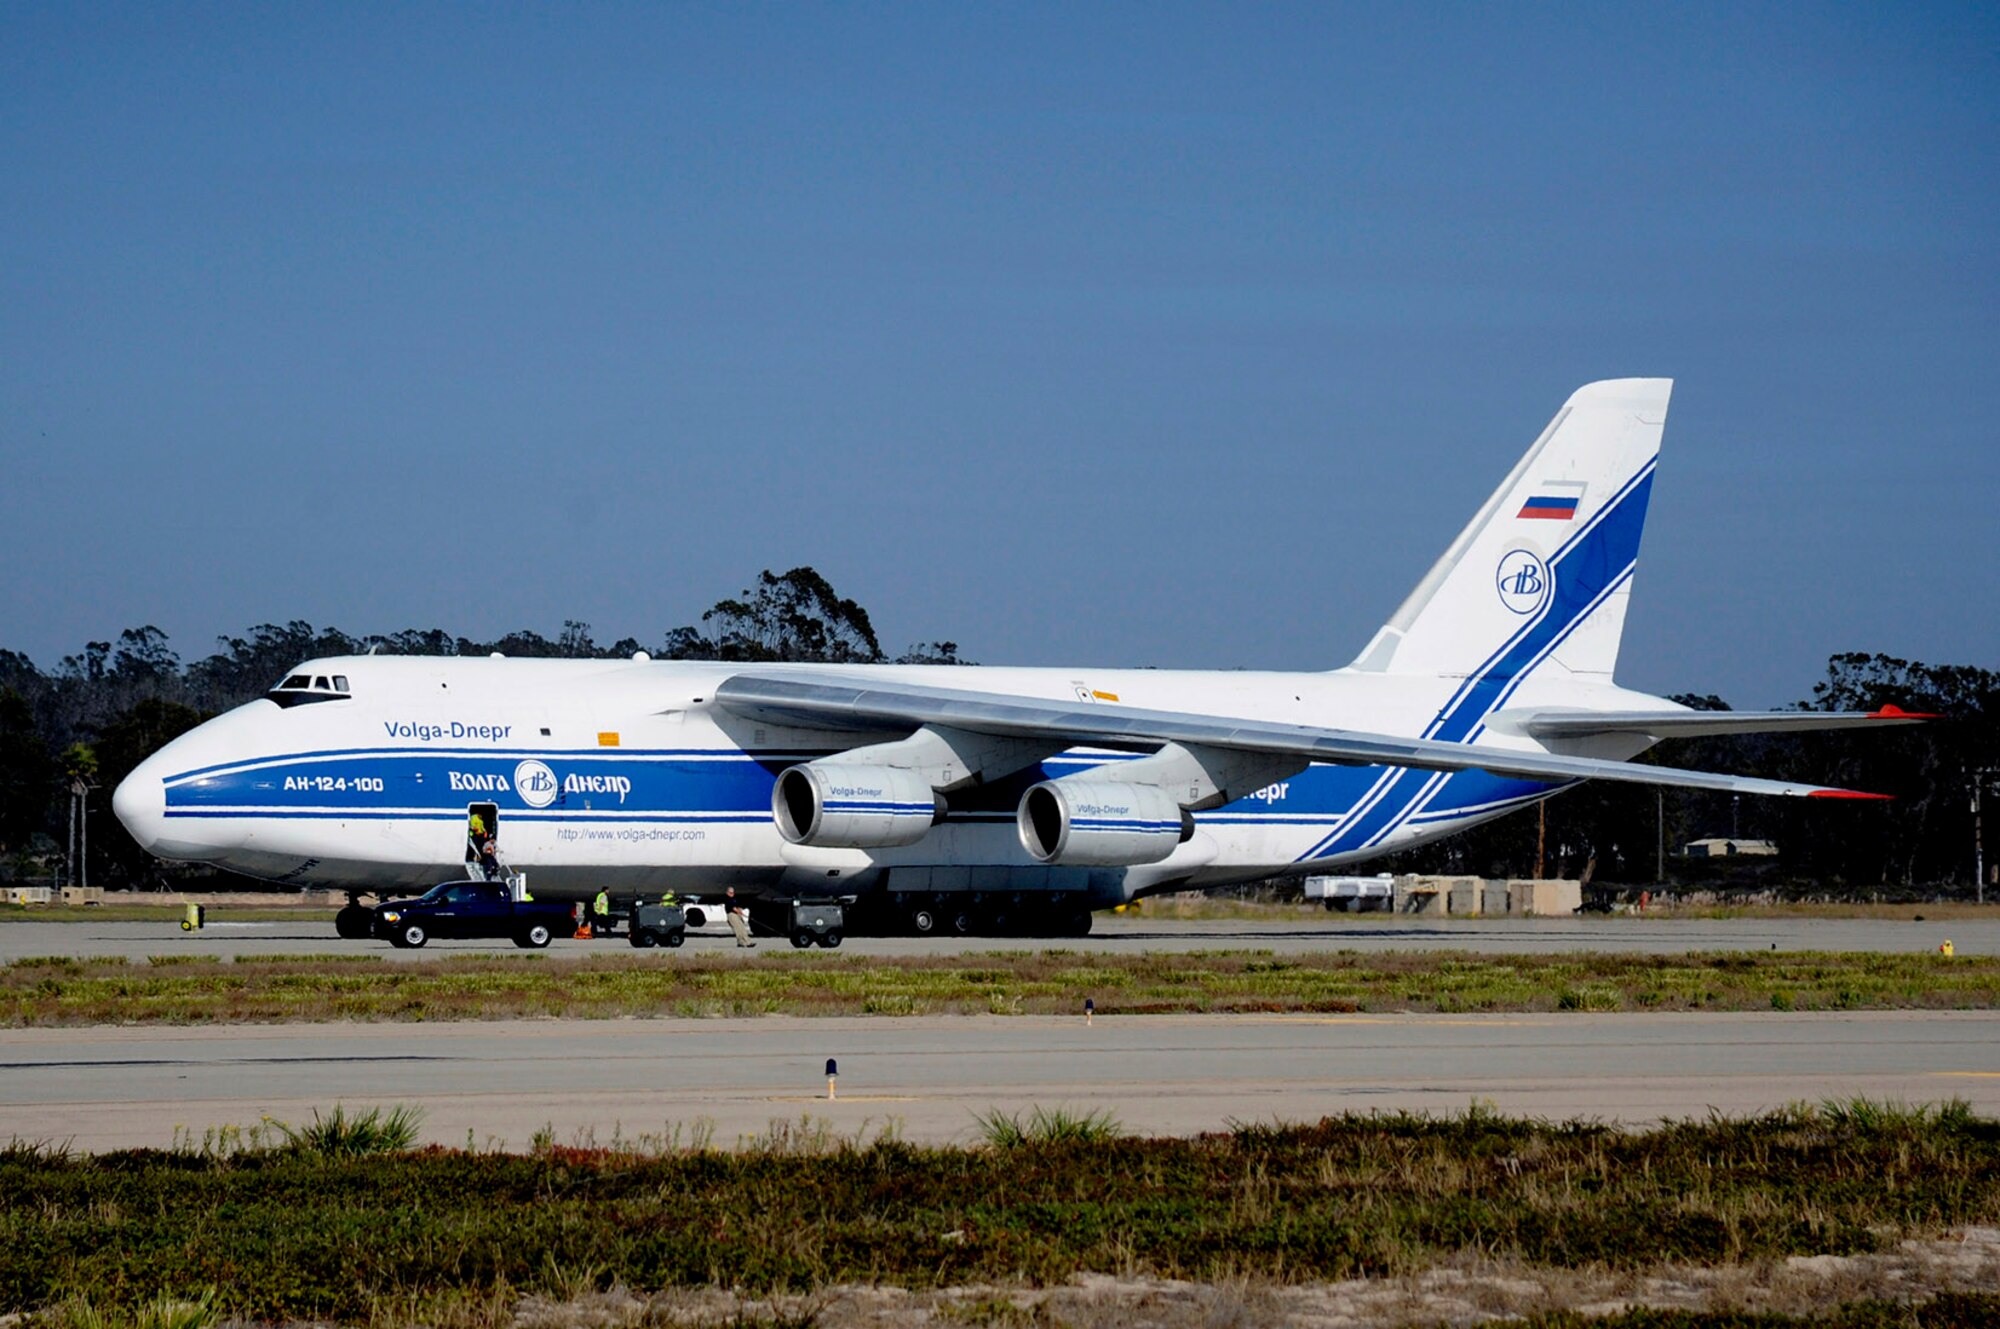 An Antonov AH-124-100 delivers rocket equipment upon its arrival at Vandenberg Air Force Base, Calif., Sept. 9, 2014. A similar aircraft -- the Antonov AN-124, one of the largest cargo aircraft in the world, made its way from a production facility in Huntsville, Ala., to deliver an Atlas V booster here Nov. 20. (U.S. Air Force Photo/Senior Airman Shane Phipps)